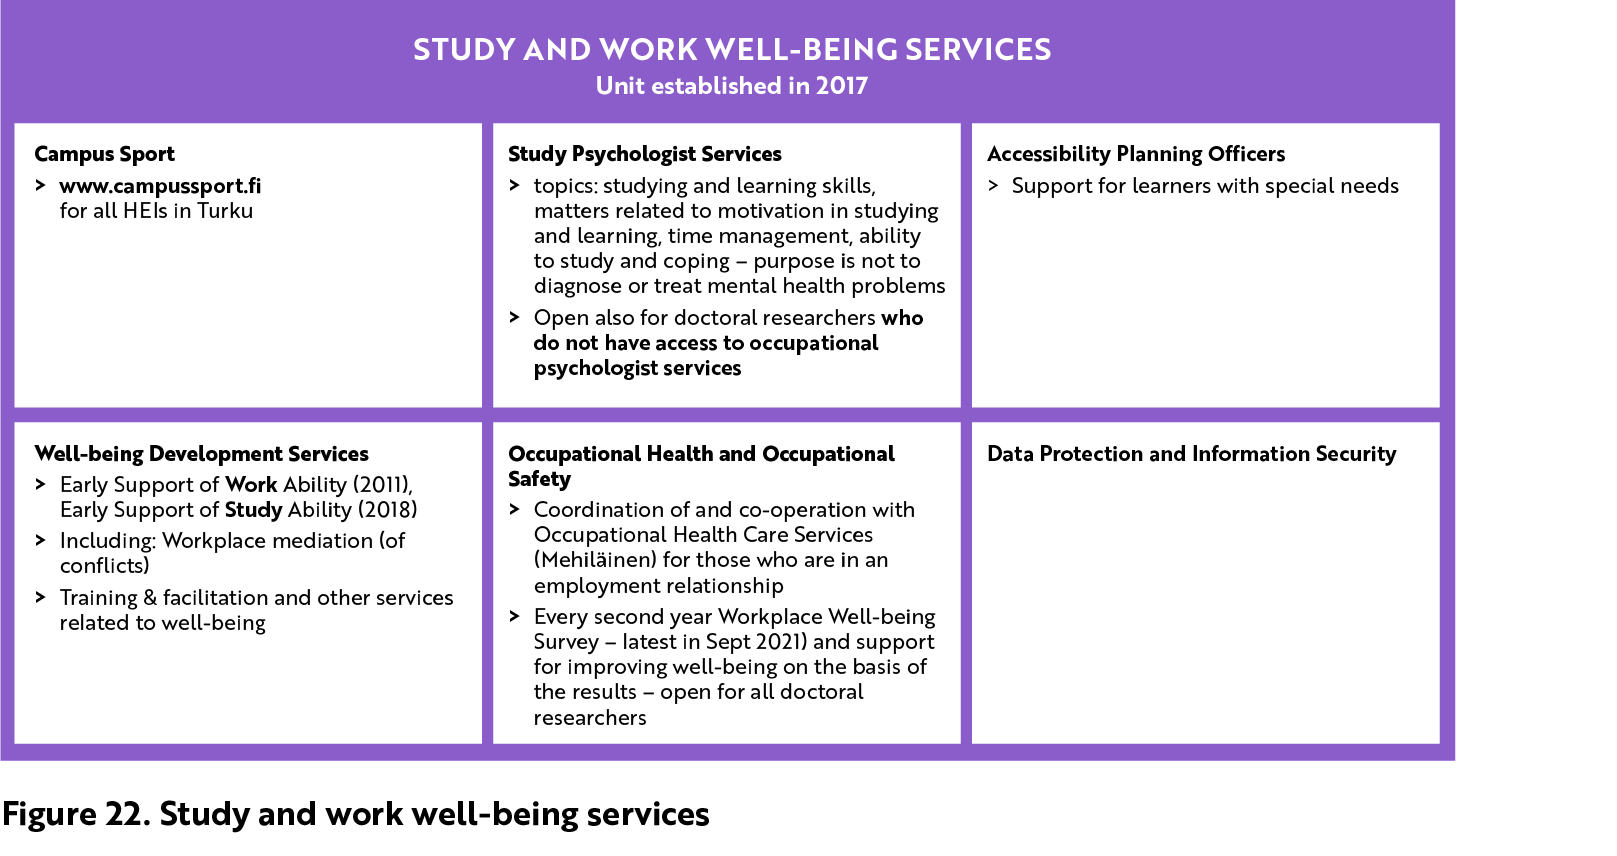 Study and work well-being services unit was established in 2017. The services include campus sport, study psychologist services, accessibility planning officers, well-being development services, occupational health and occupational safety and data protection and information security. Campus Sport is for all HEIs in Turku. The topics of study psychologist services include studying and learning skills, matters re¬lated to motivation in studying and learning, time management, ability to study and coping. The purpose is not to diagnose or treat mental health problems. Open also for doctoral researchers who do not have access to occupational psychologist services. Accessibility P¬lanning Officers offer support for learners with special needs. Well-being Development Services include Early Support of Work Ability (2011), Early Support of Study Ability (2018), Workp¬lace mediation for conflicts and training and facilitation and other services rel¬ated to well-being.  Occupational Health and Occupational Safety include Coordination of and co-operation with Occupational Health Care Services (Mehiläinen) for those who are in an employment re¬lationship. Every second year a Workpl¬ace Well-being Survey, ¬latest being in September 2021, and support for improving well-being on the basis of the results. Open for all doctoral researchers.